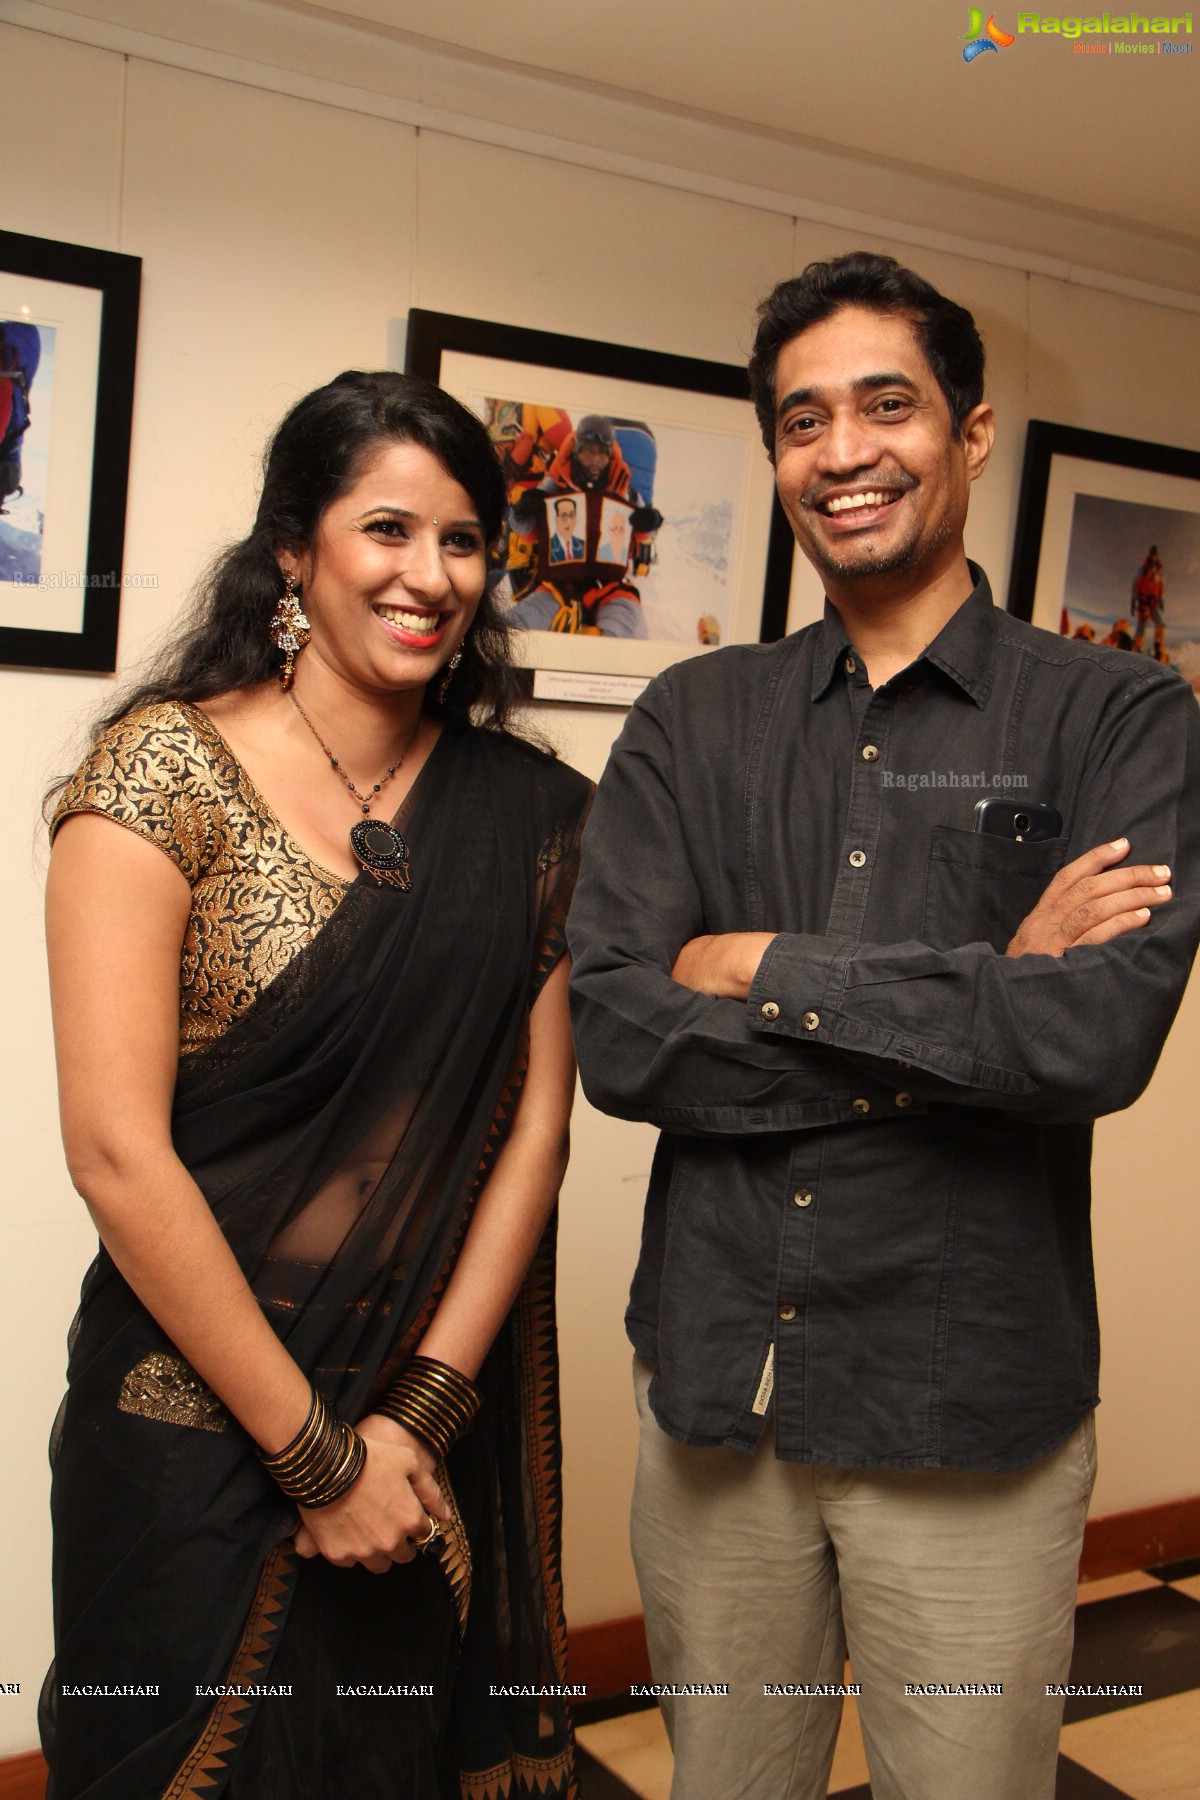 Mount Everest Journey Of Poorna & Anand at Muse Art Gallery